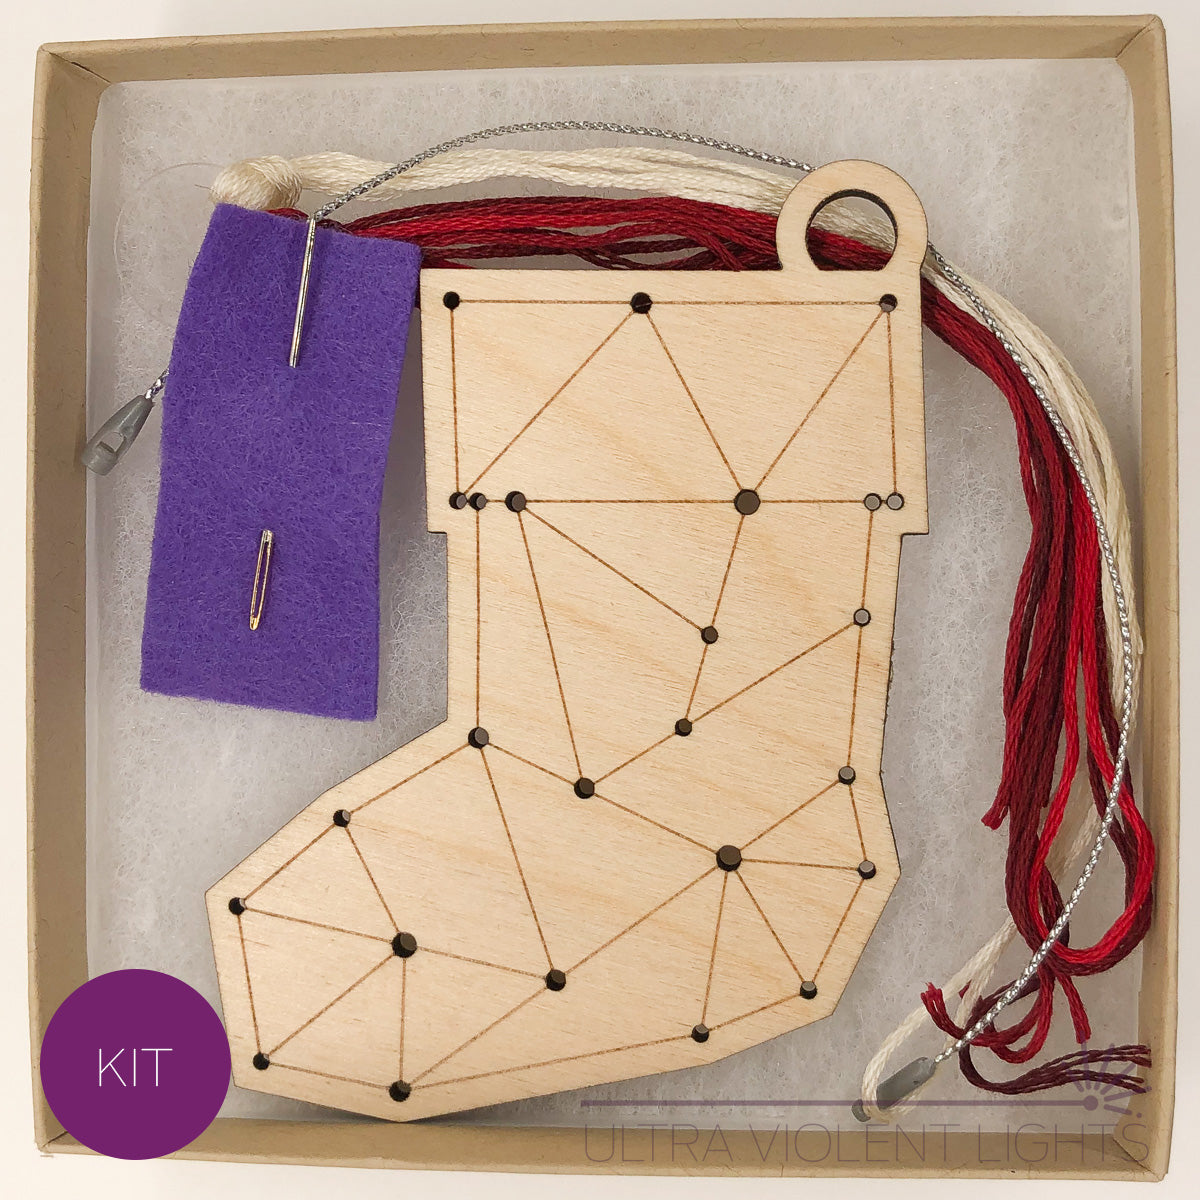 A stocking wooden embroidery kit with floss and a needle in a box